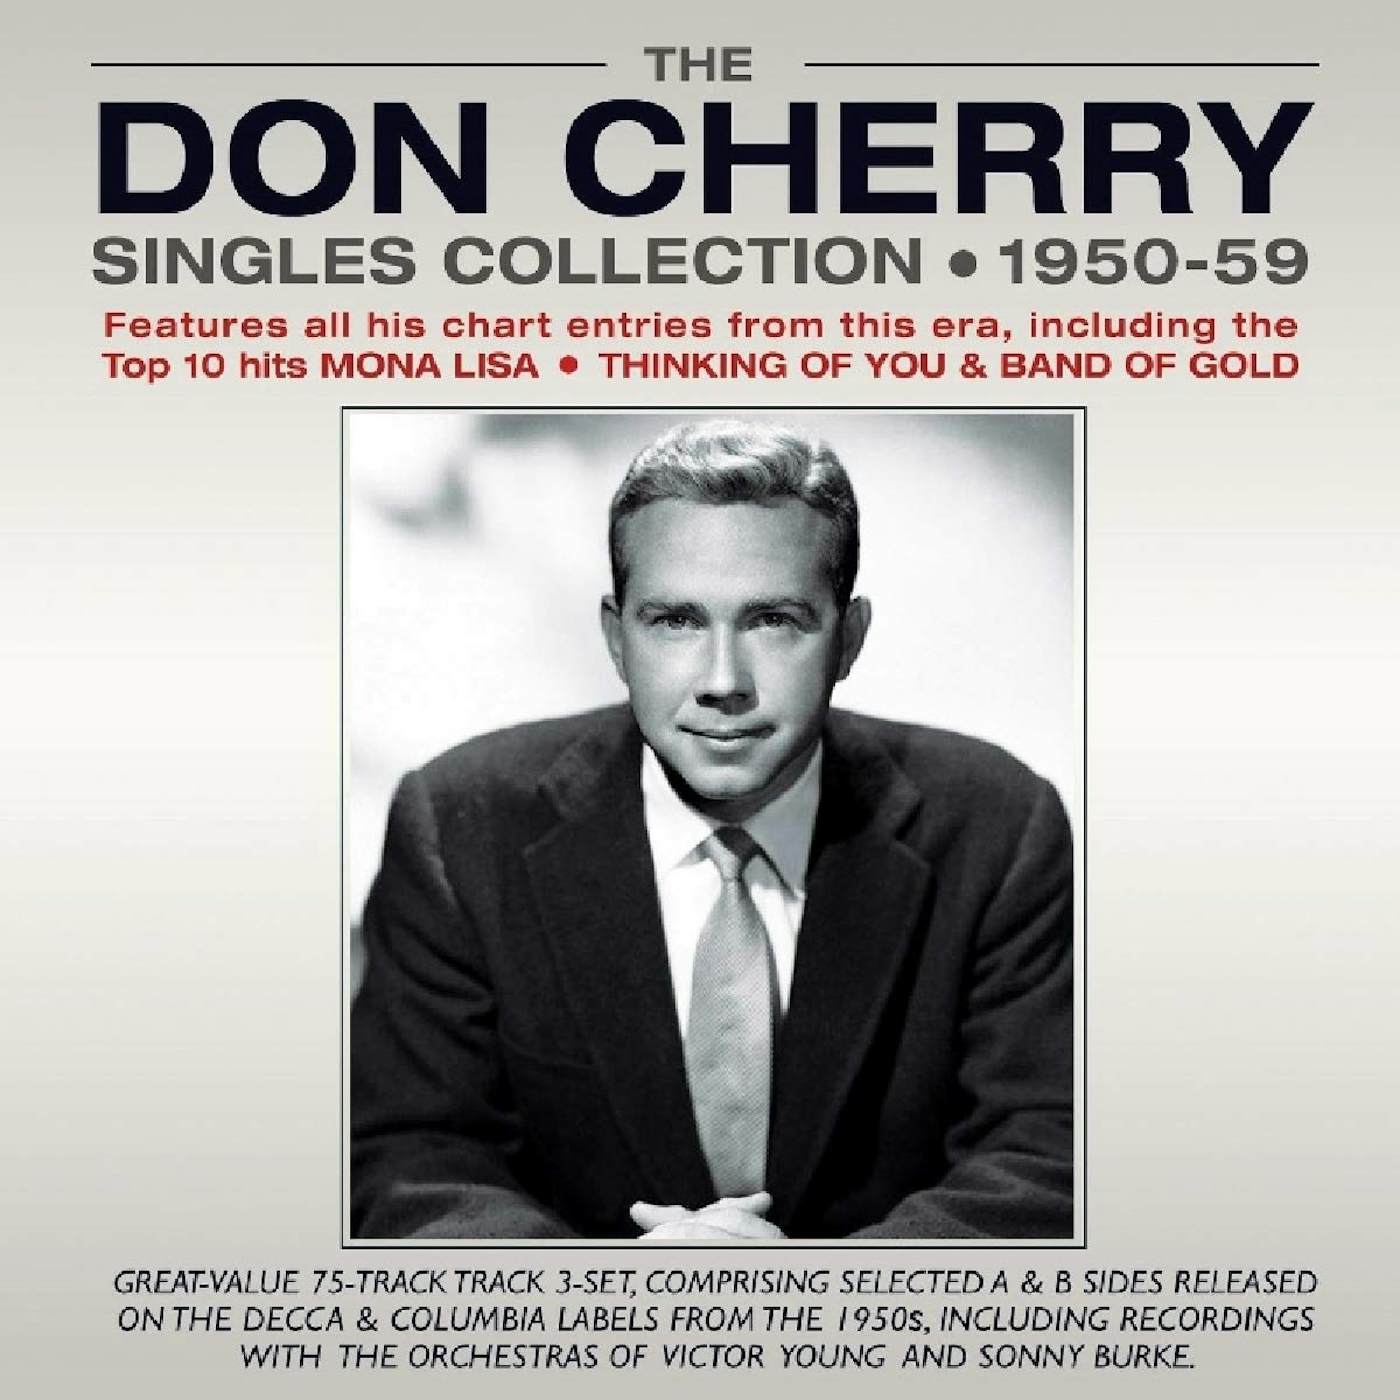 Don Cherry SINGLES COLLECTION 1950-59 CD